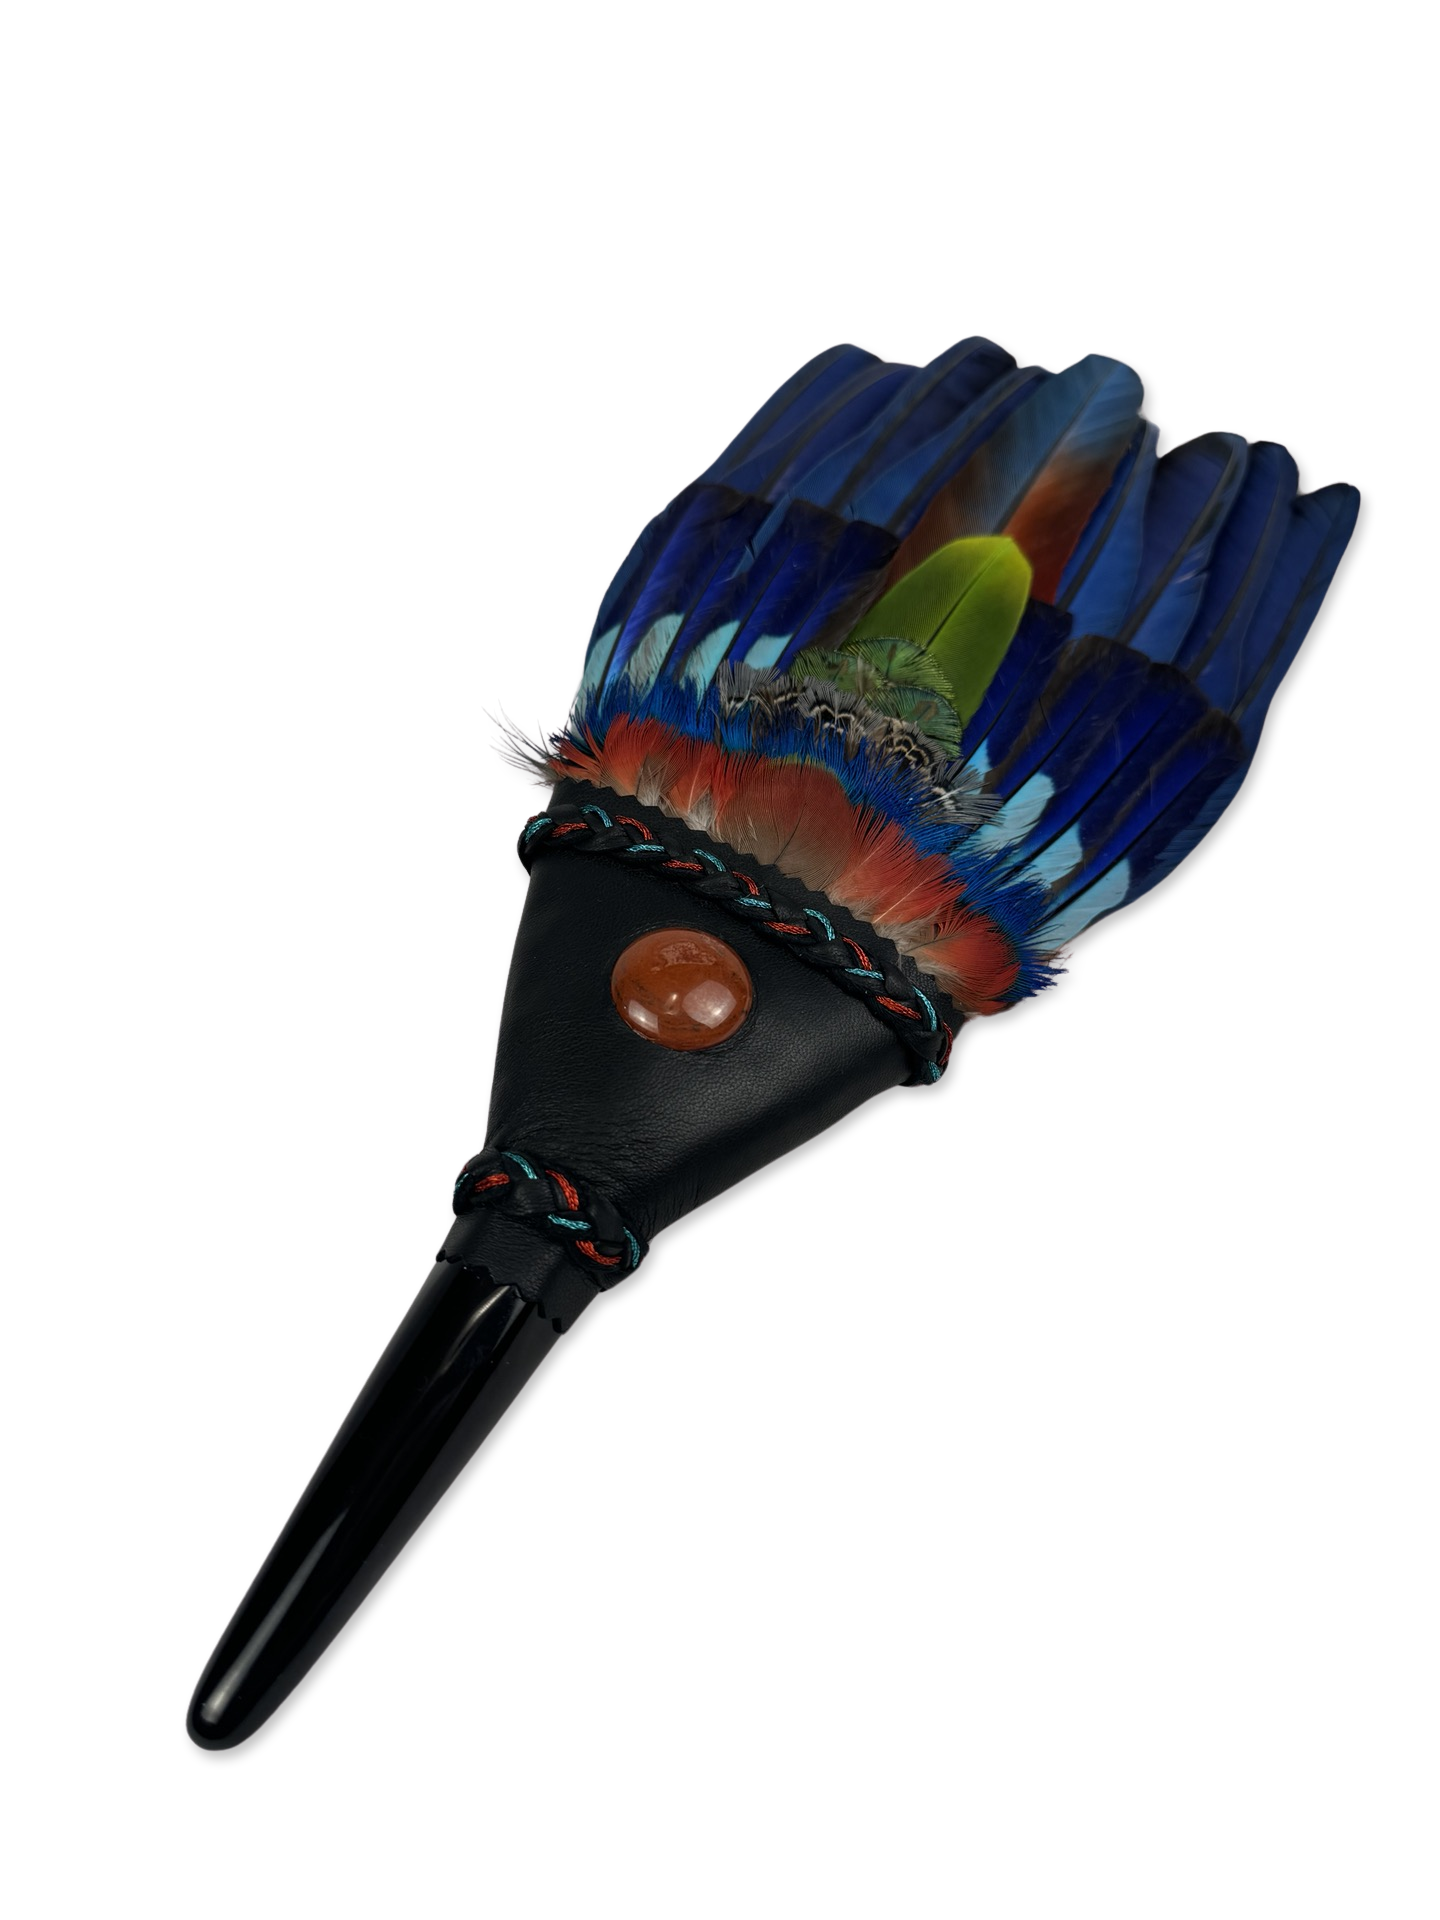 Macaw & Blue Indian Roller Smudge Fan with Black Obsidian Handle